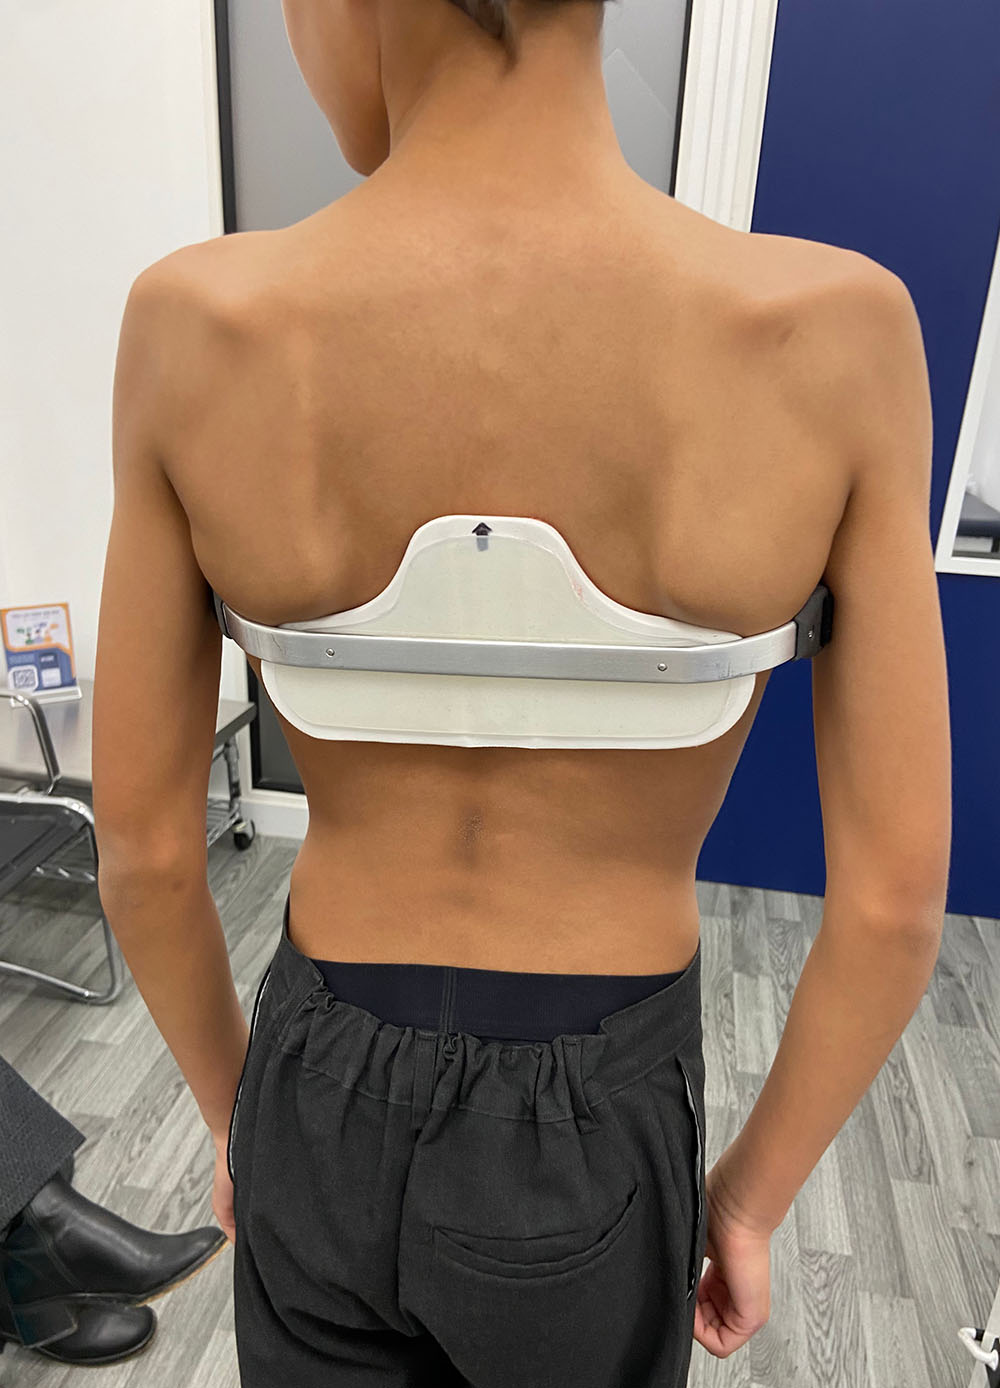 Will's pectus carinatum started to improve within months after starting treatment with the London Orthotic Consultancy and wearing bespoke pectus braces